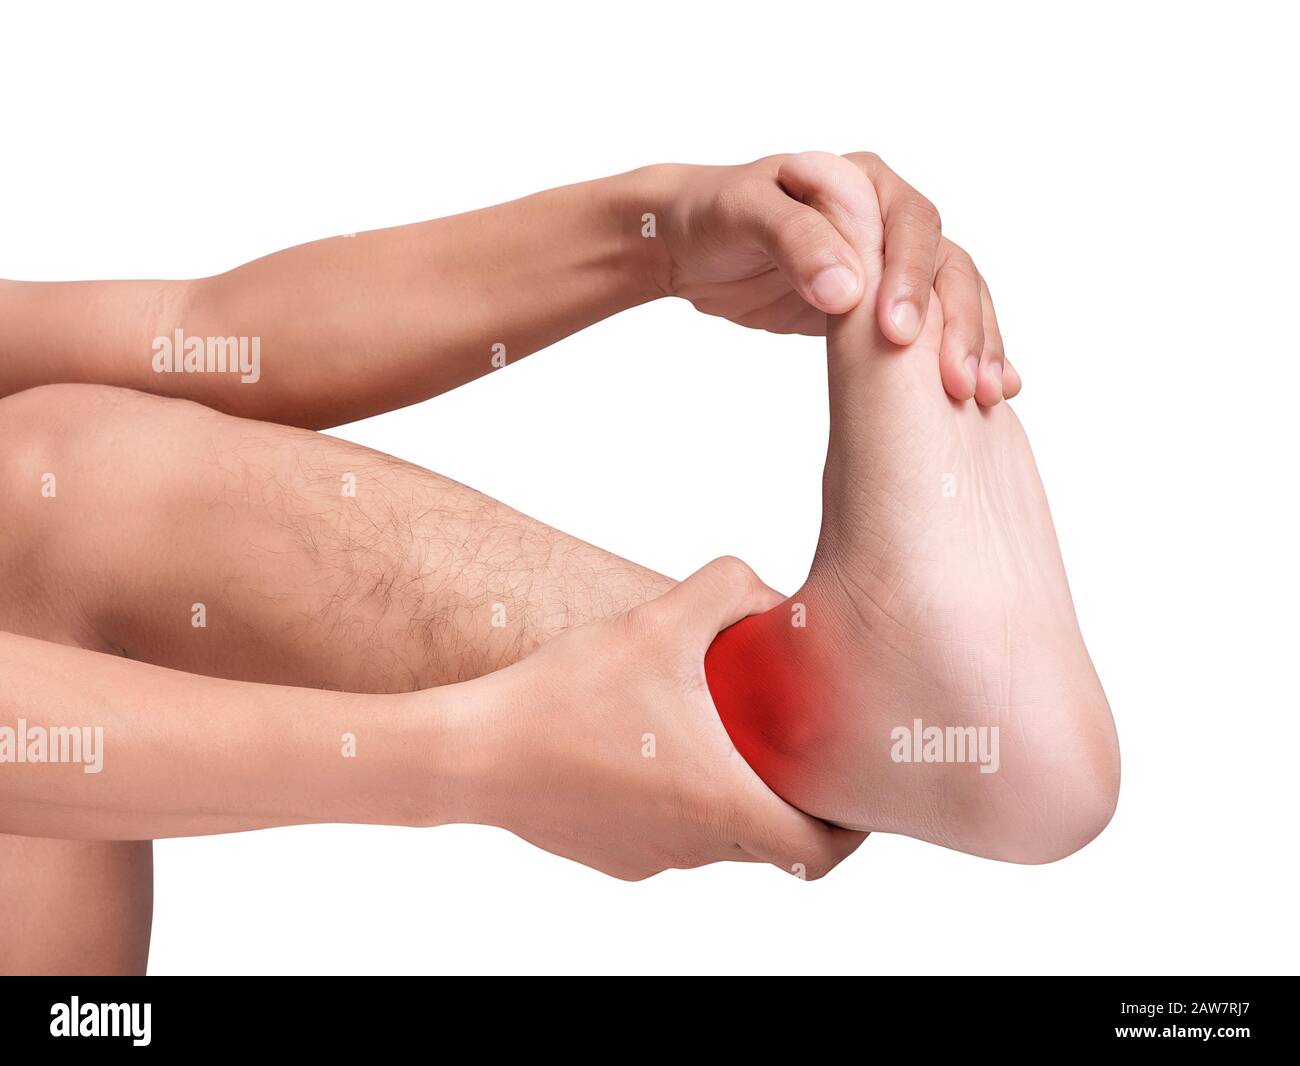 man suffering from cramp using hand massage painful foot and ankle. red color highlight at ankle , ankle muscles isolated on white background. health Stock Photo